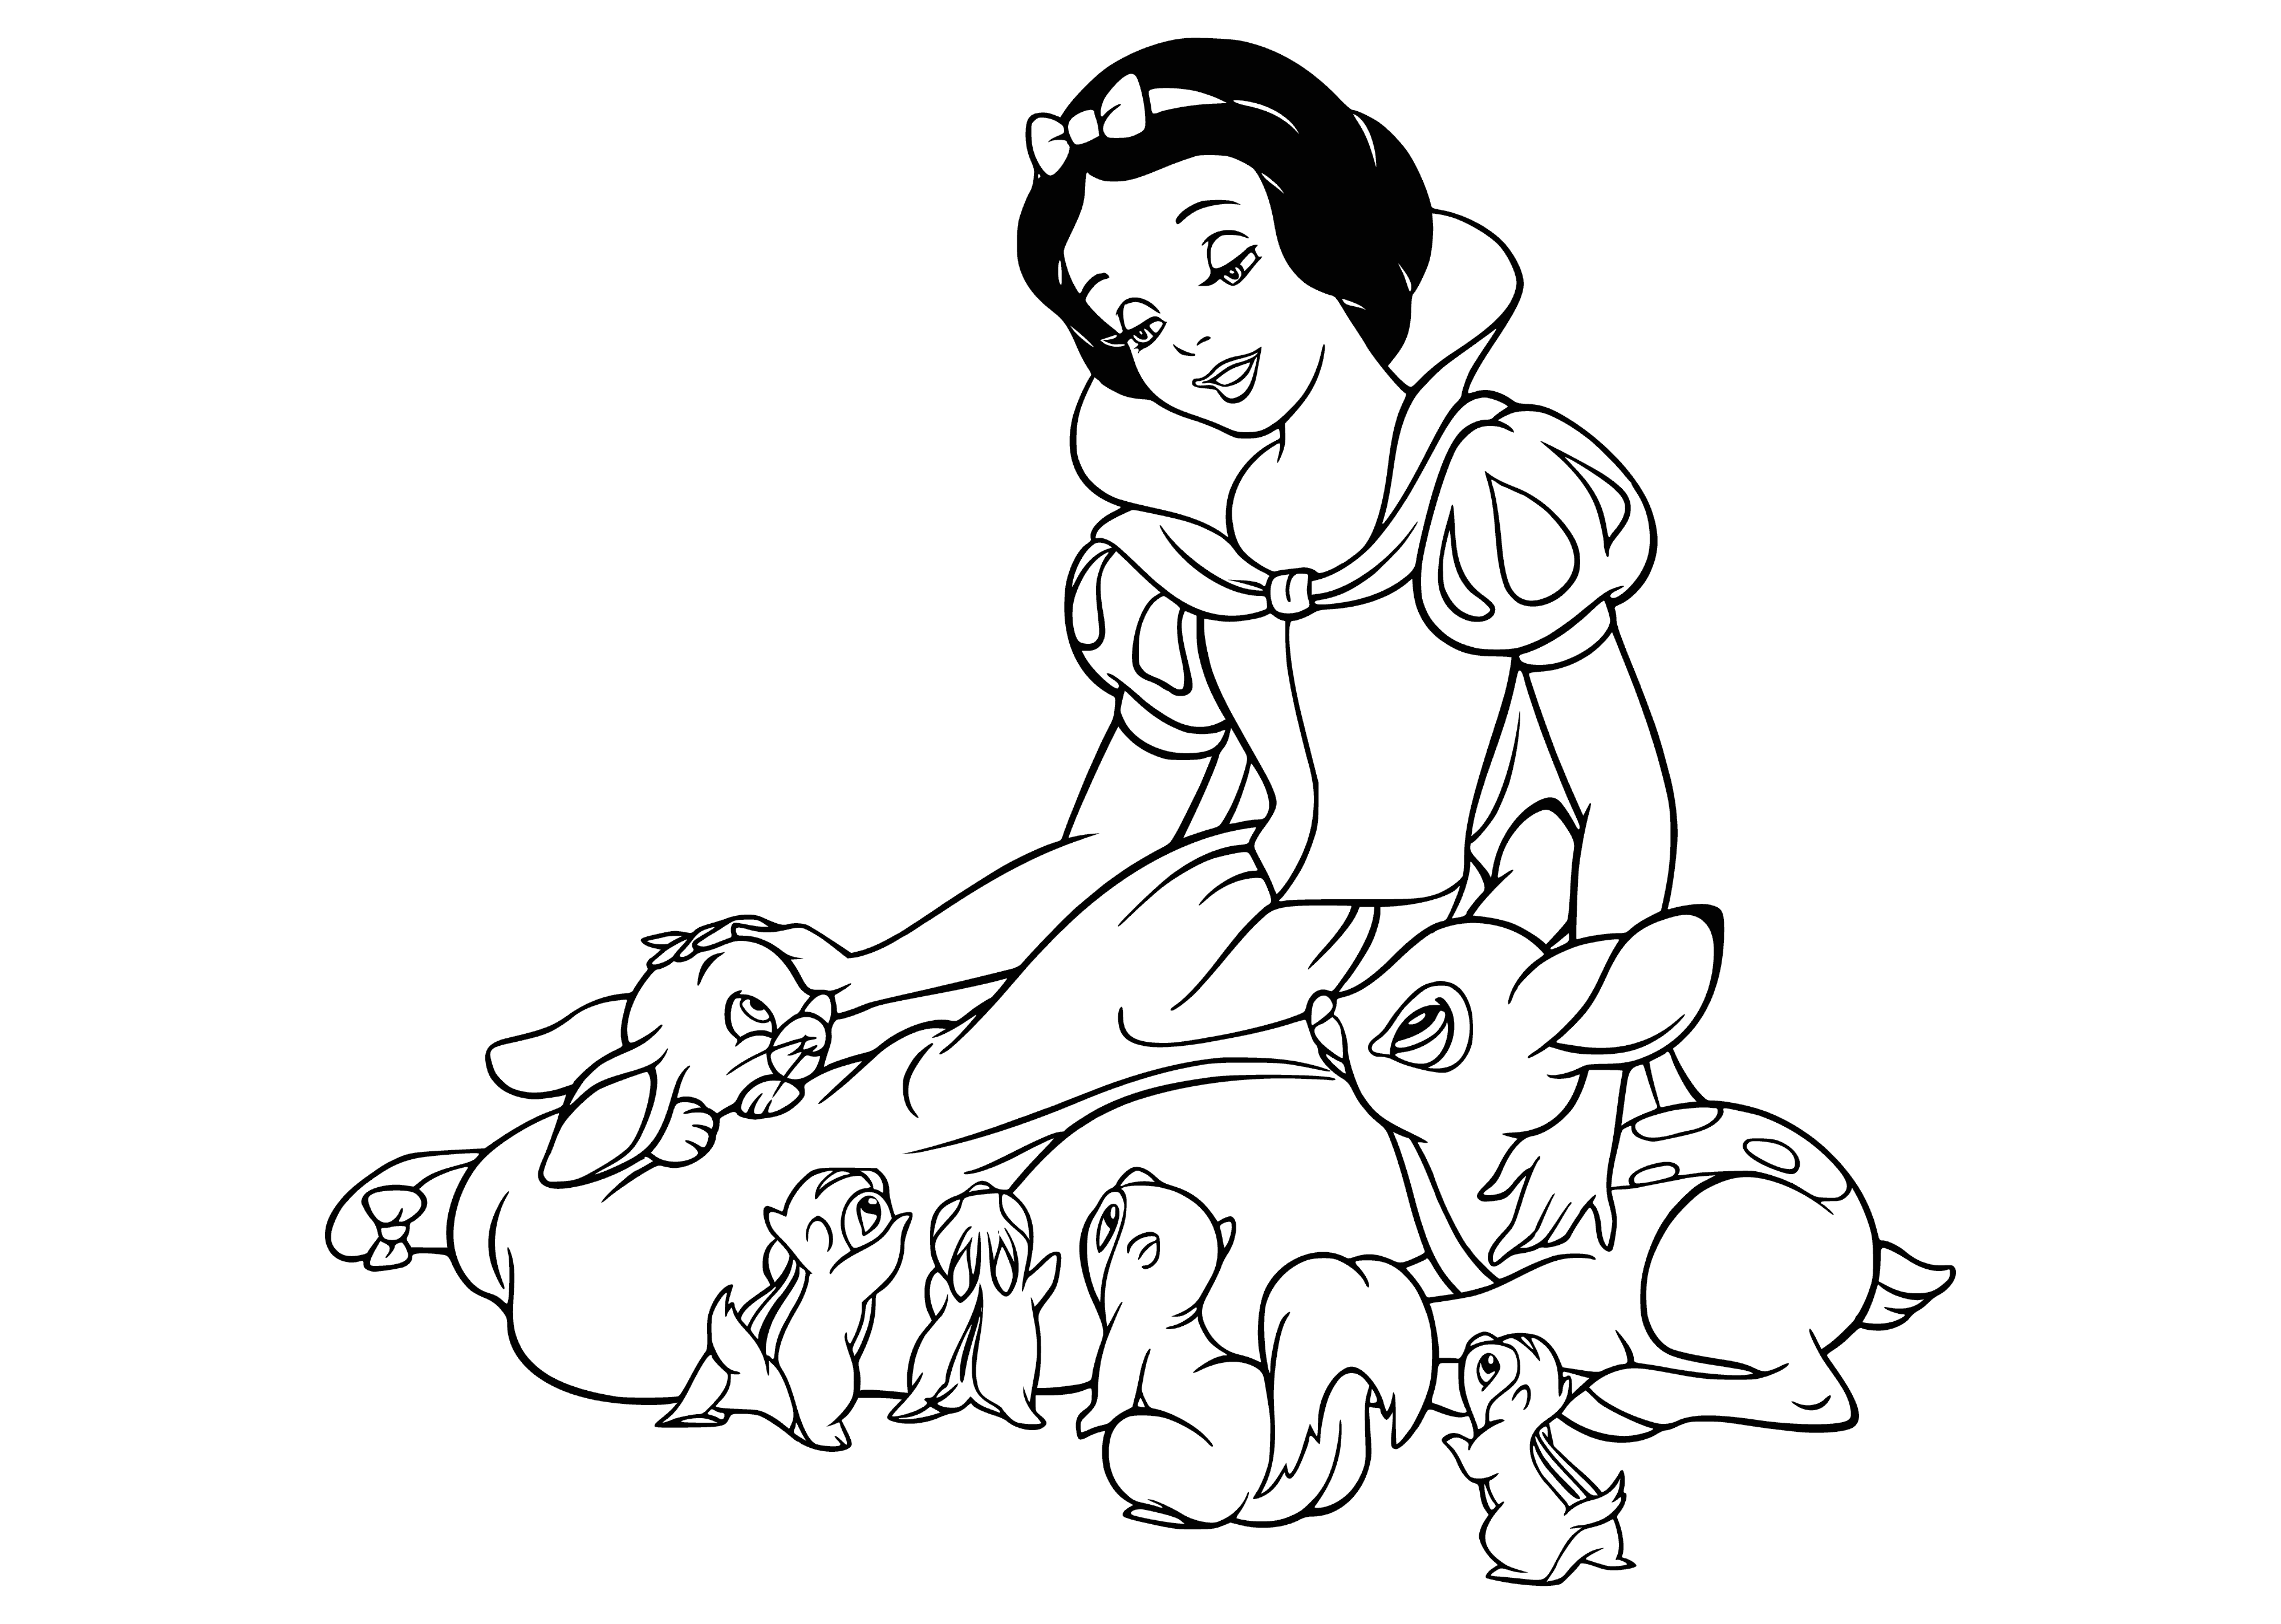 coloring page: A girl with long black hair is gently petting a deer, with other animals - a rabbit, a squirrel, and a bird - around her and a kind expression on her face.